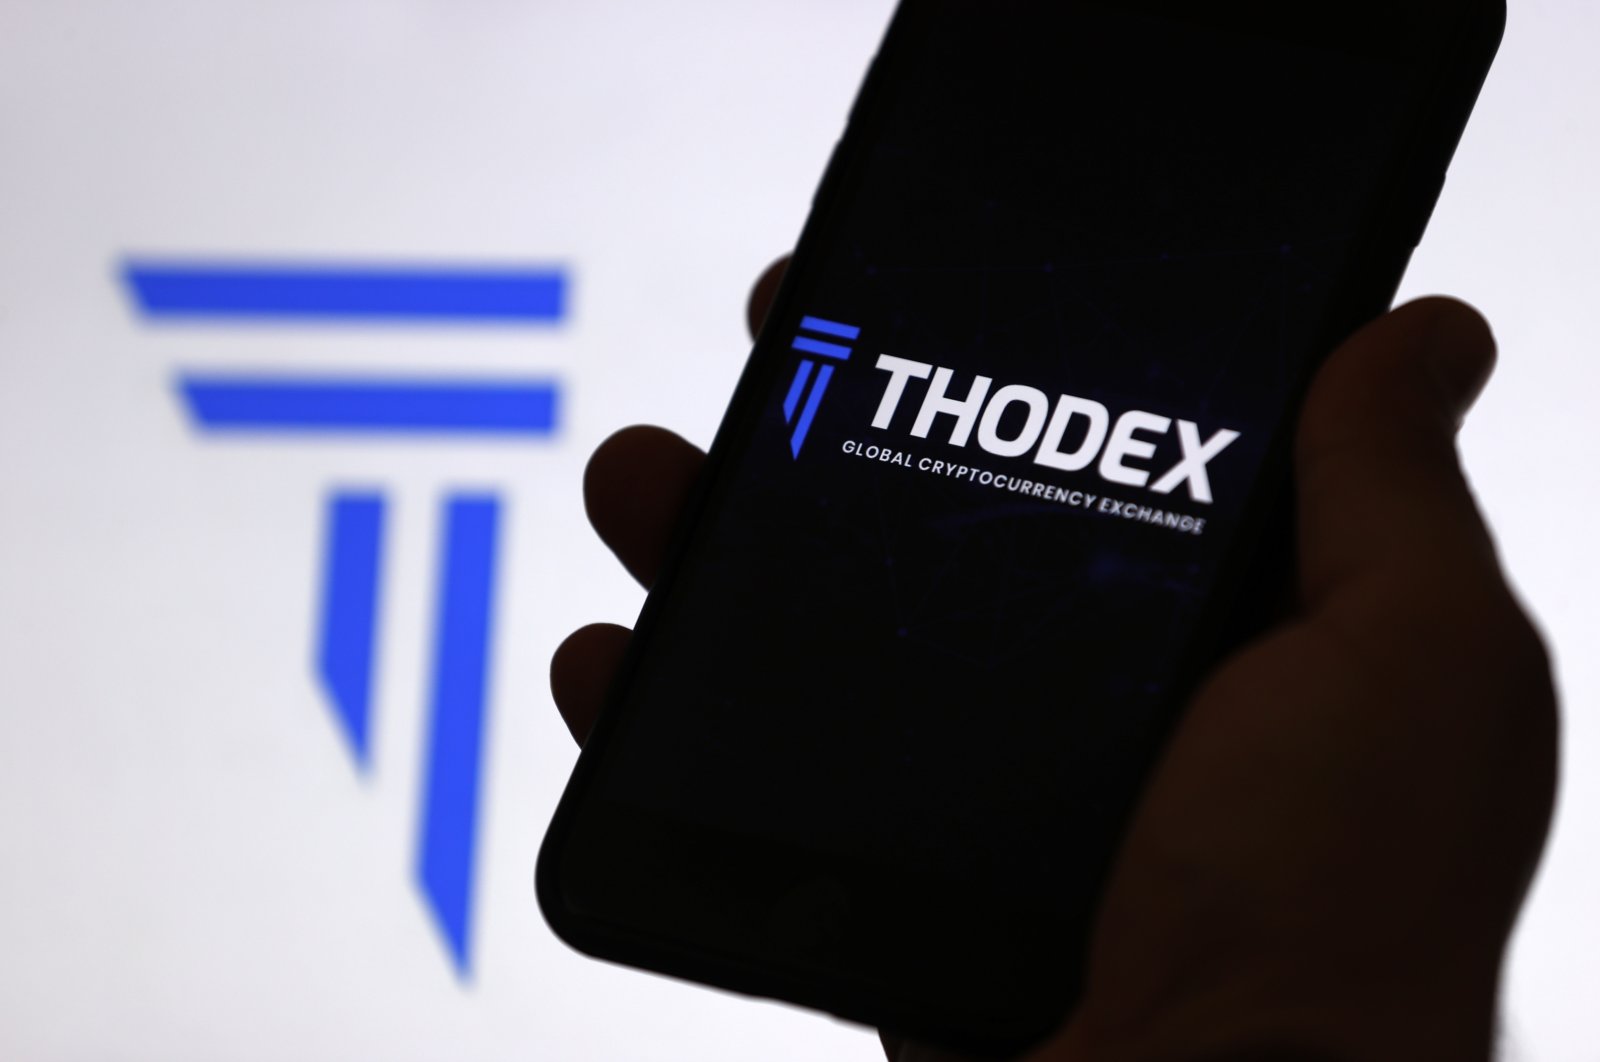 The Thodex cryptocurrency exchange logo is displayed on a mobile phone screen, April 22, 2021. (AA Photo)